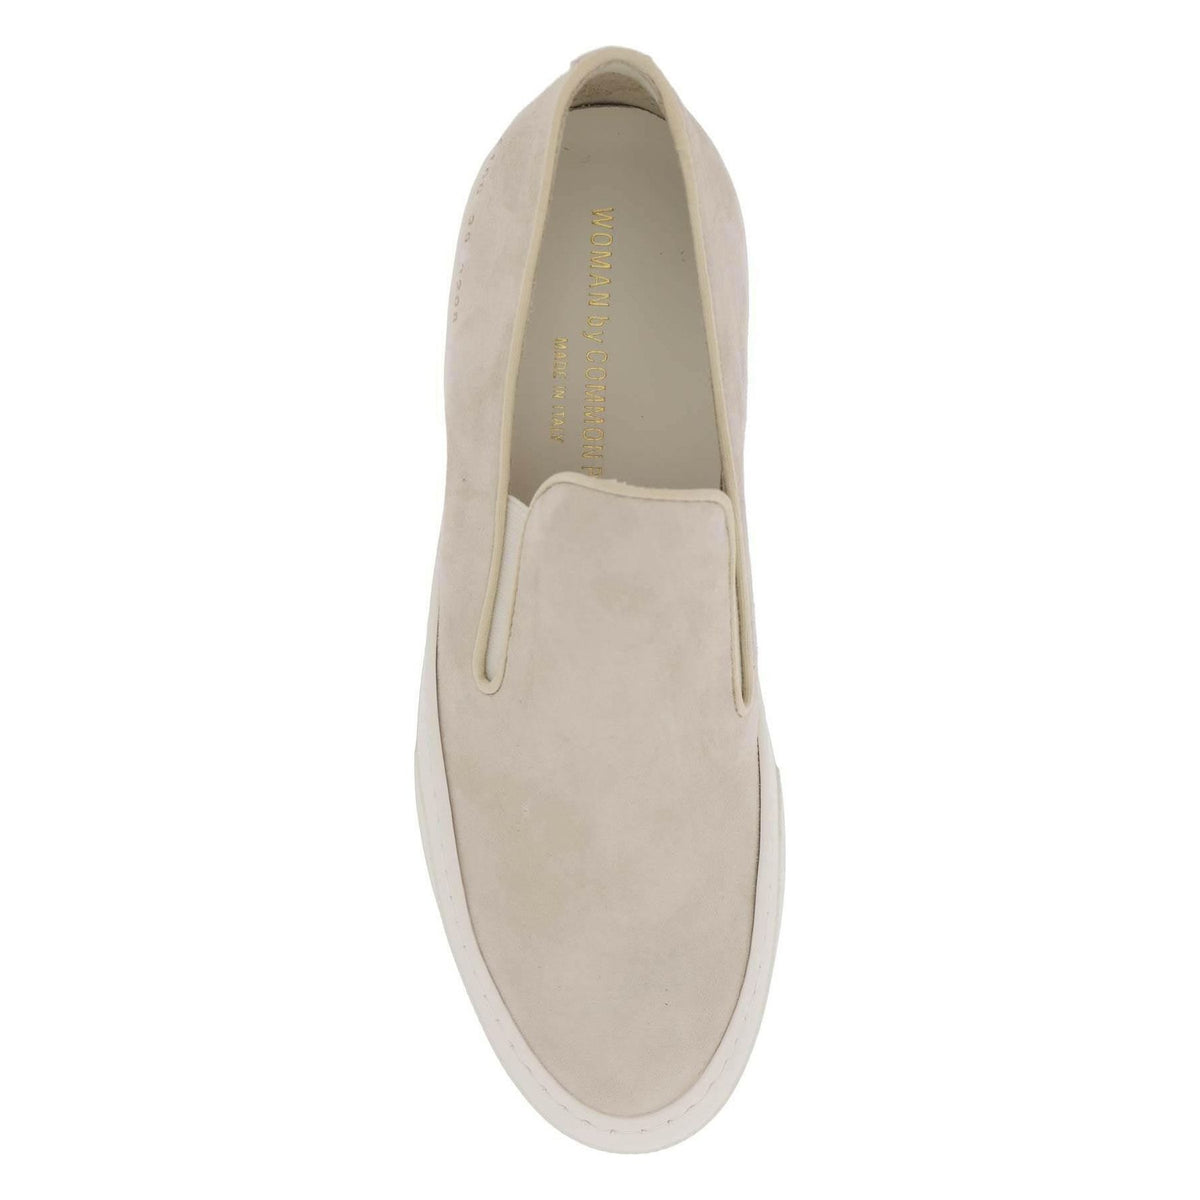 Suede Slip-On Sneakers COMMON PROJECTS JOHN JULIA.